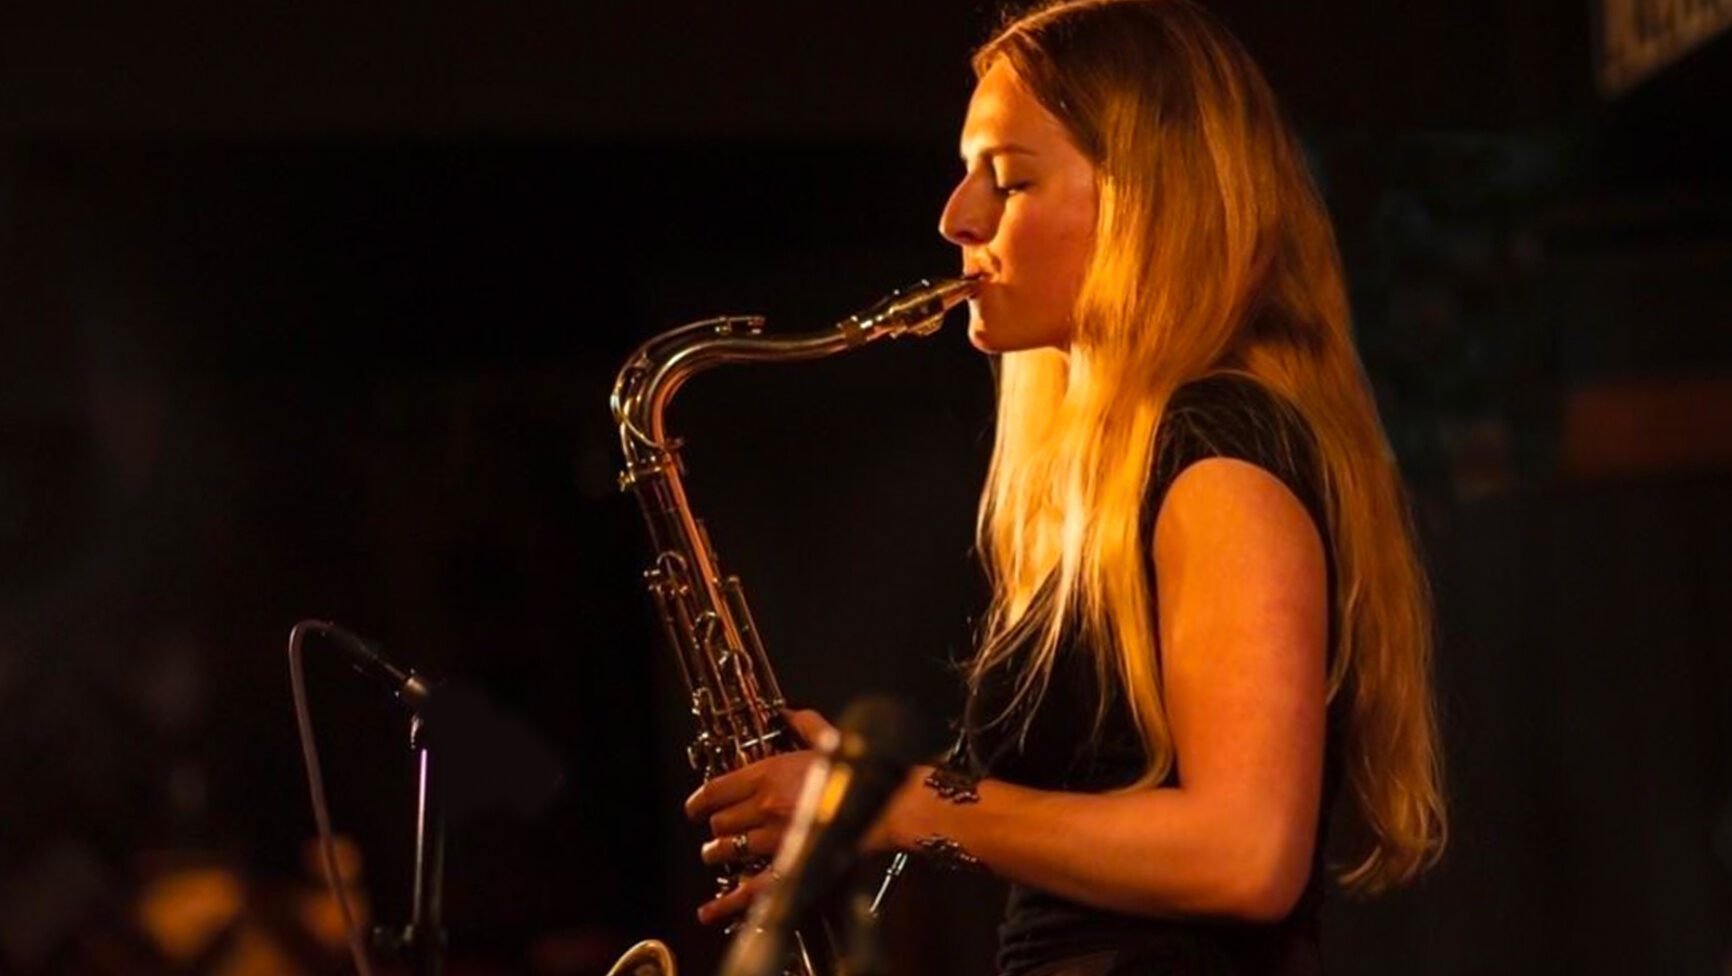 Women in Jazz Media and Tomorrow’s Warriors presents Maddy Coombs Trio